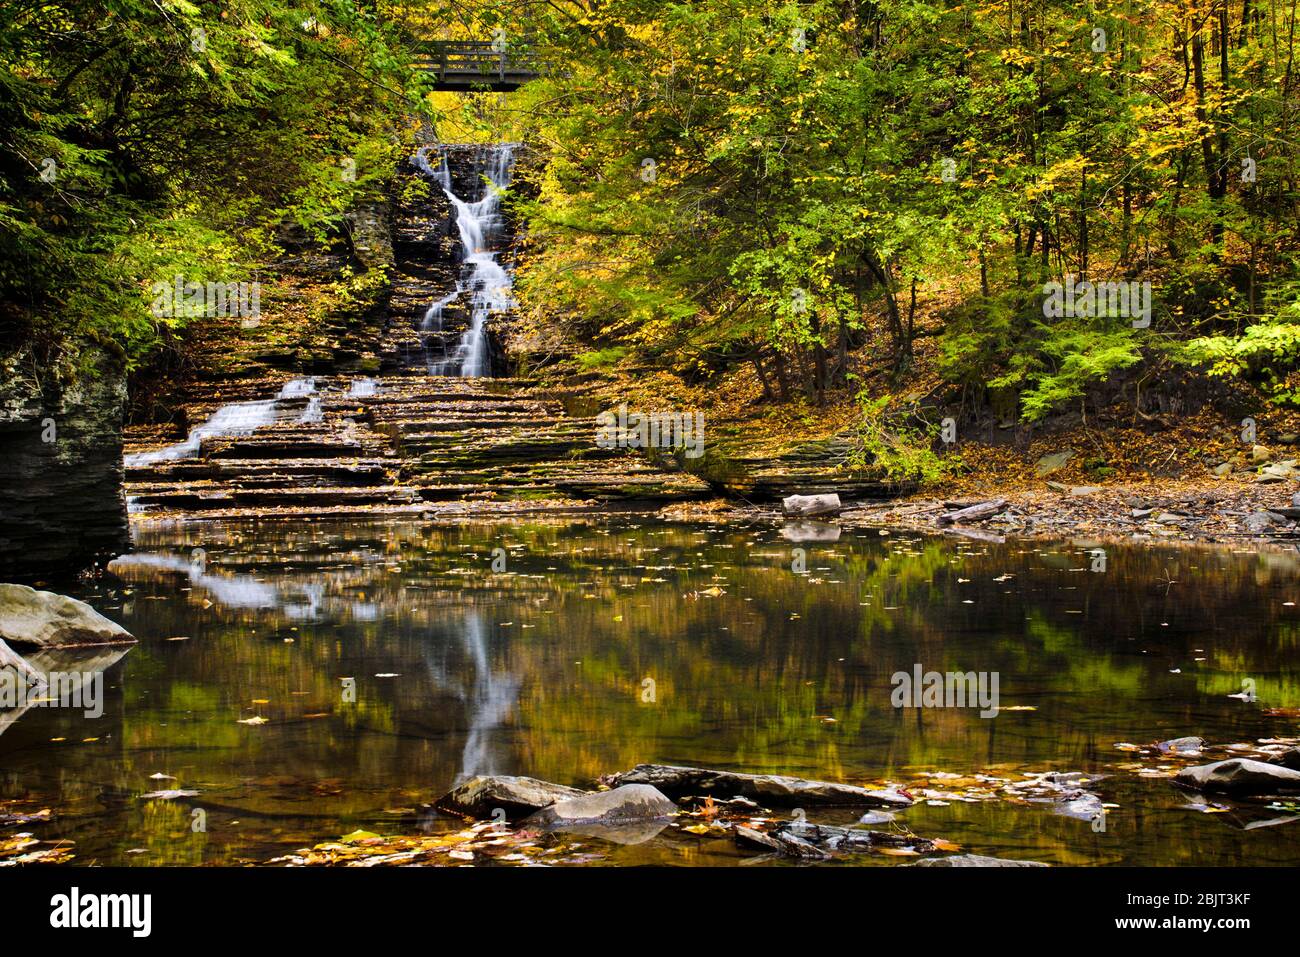 Small waterfall at Buttermilk Falls in Ithaca New York, USA. Stock Photo